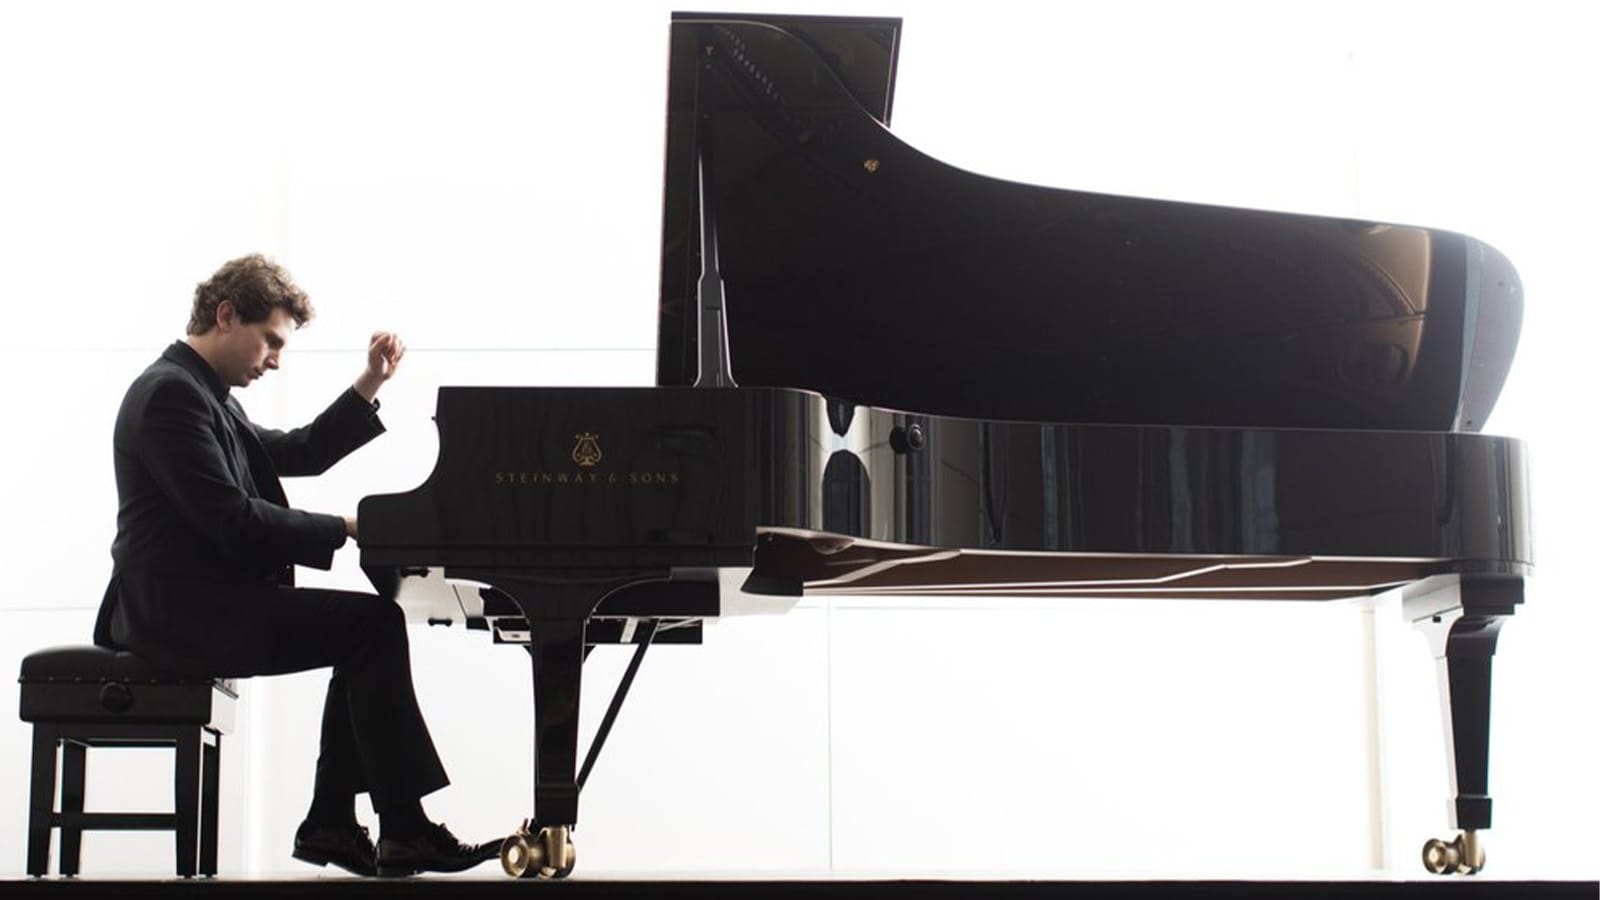 A man in a black suit plays a grand piano